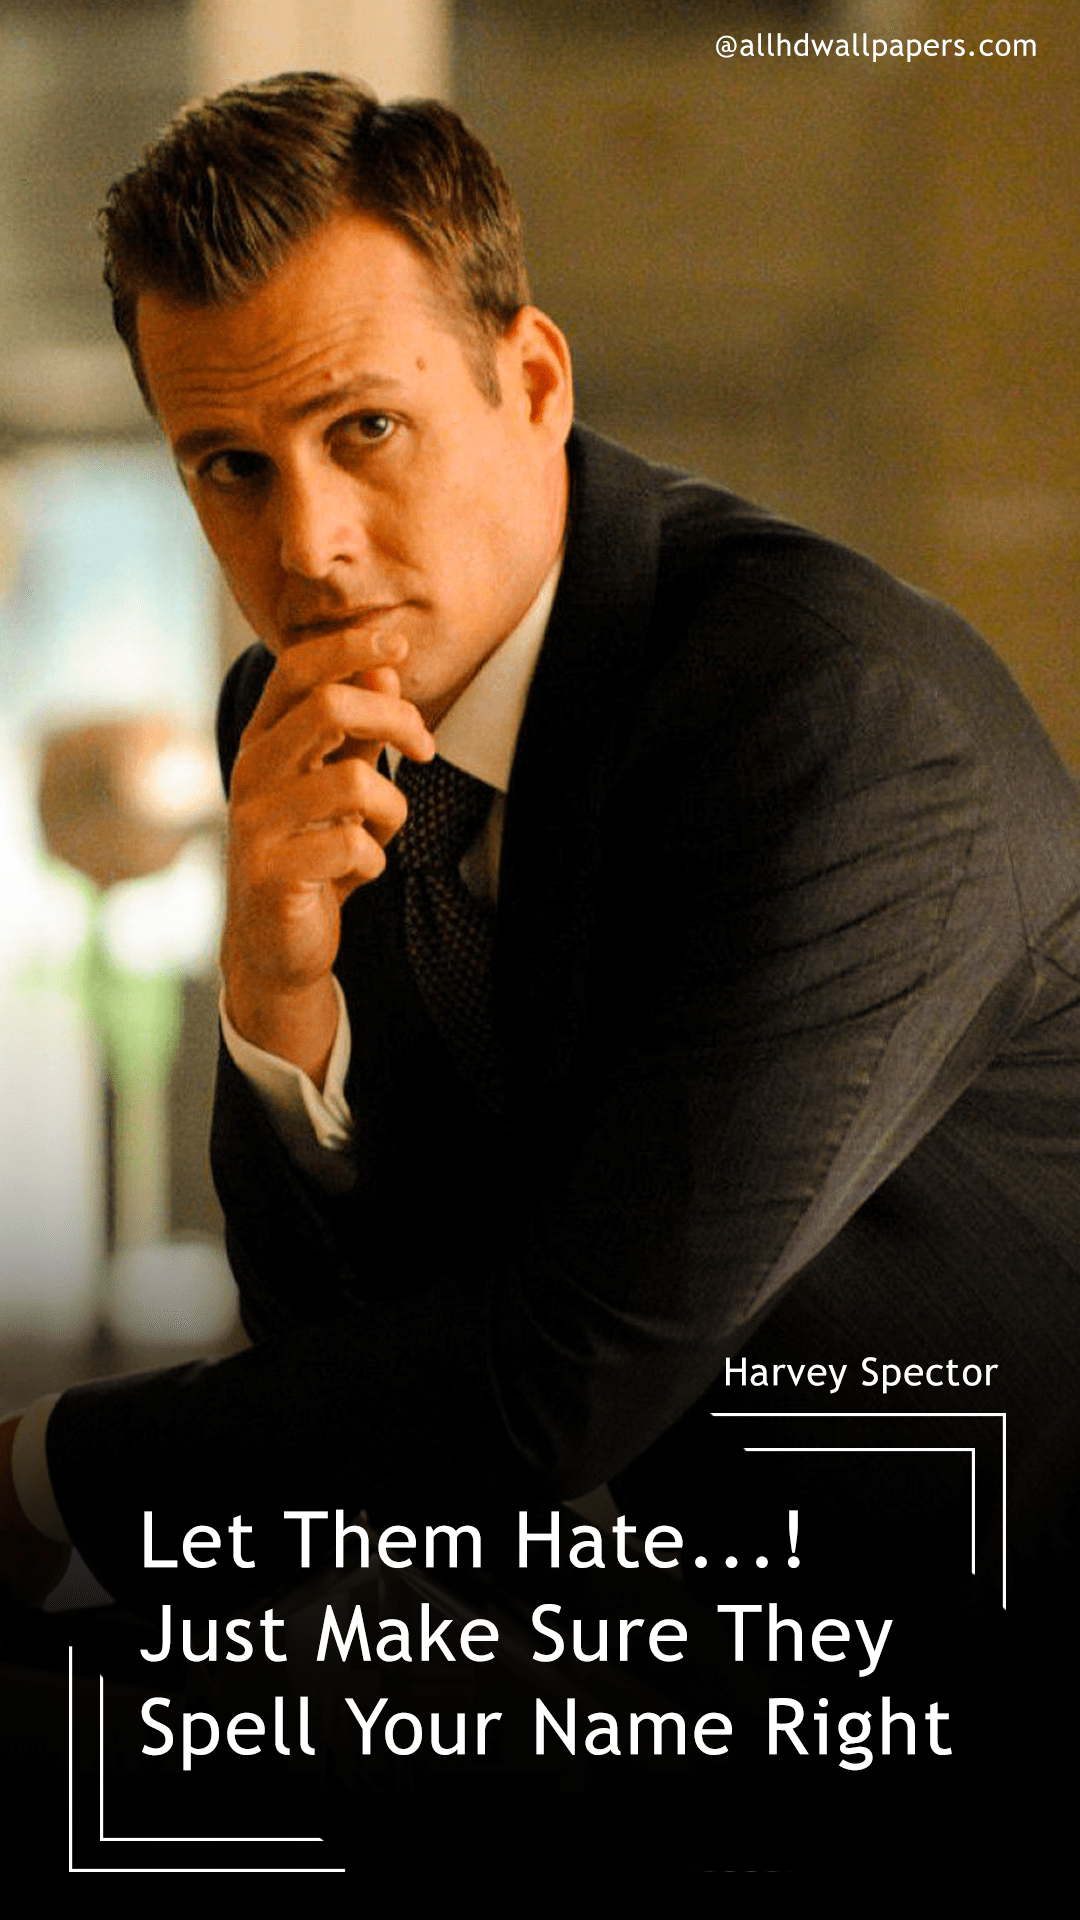 Harvey Specter Quotes Wallpapers - Top Free Harvey Specter Quotes